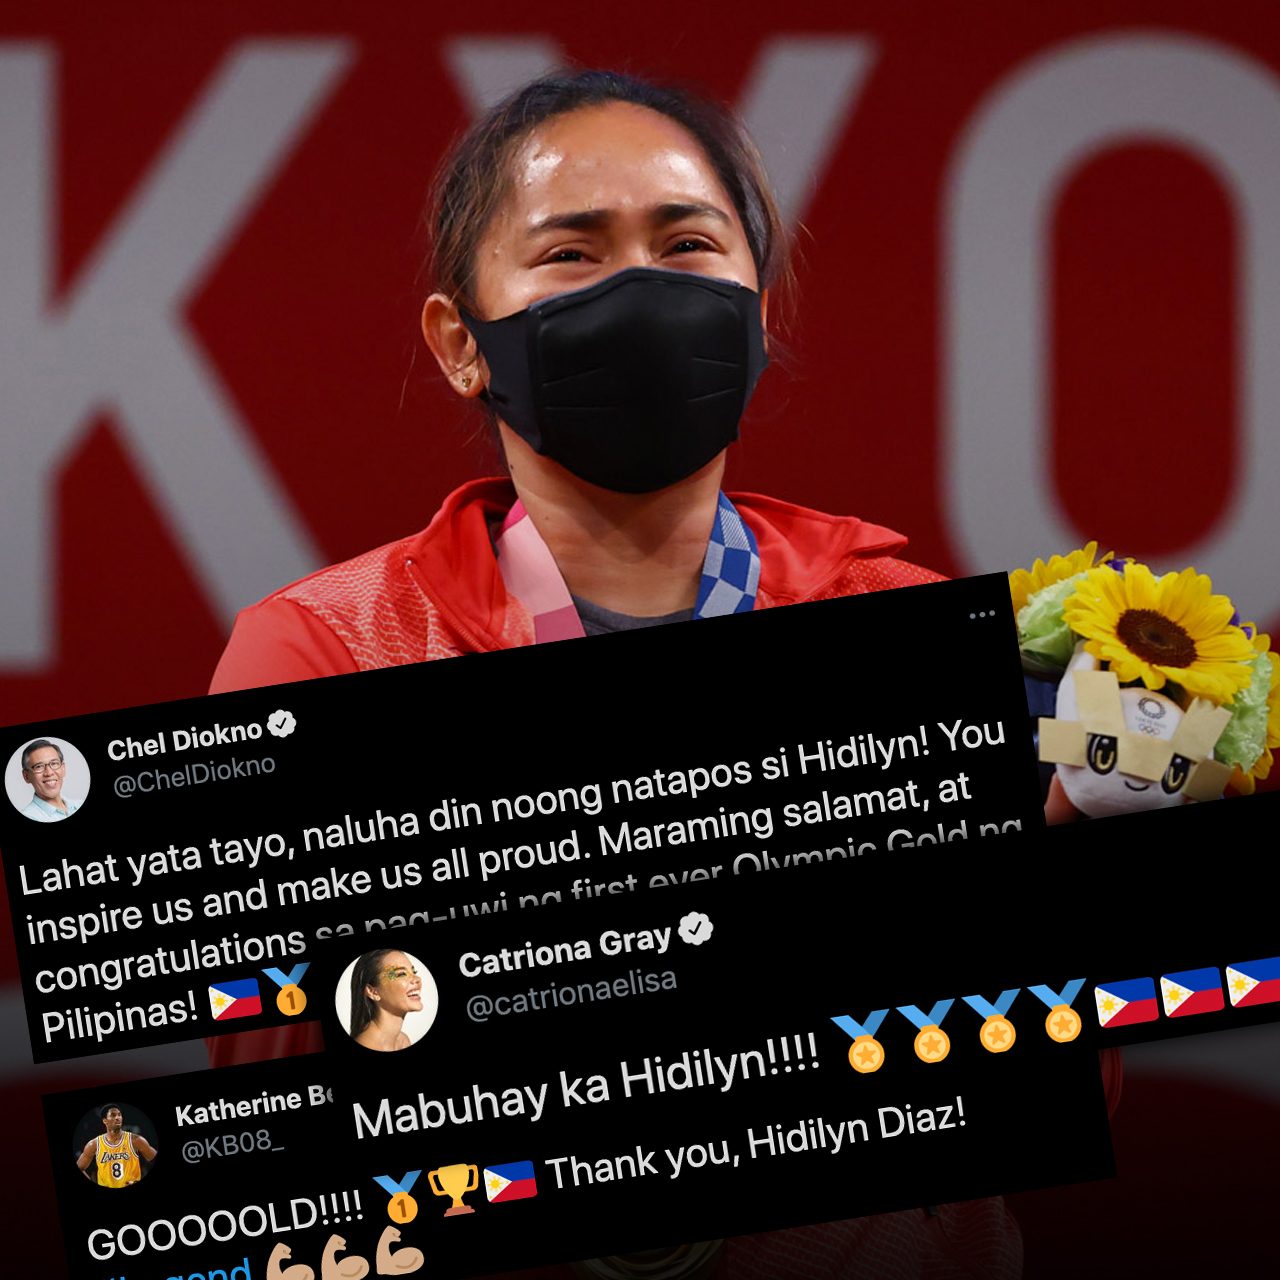 Filipino netizens erupt with joy after Hidilyn Diaz’s historic Olympic win